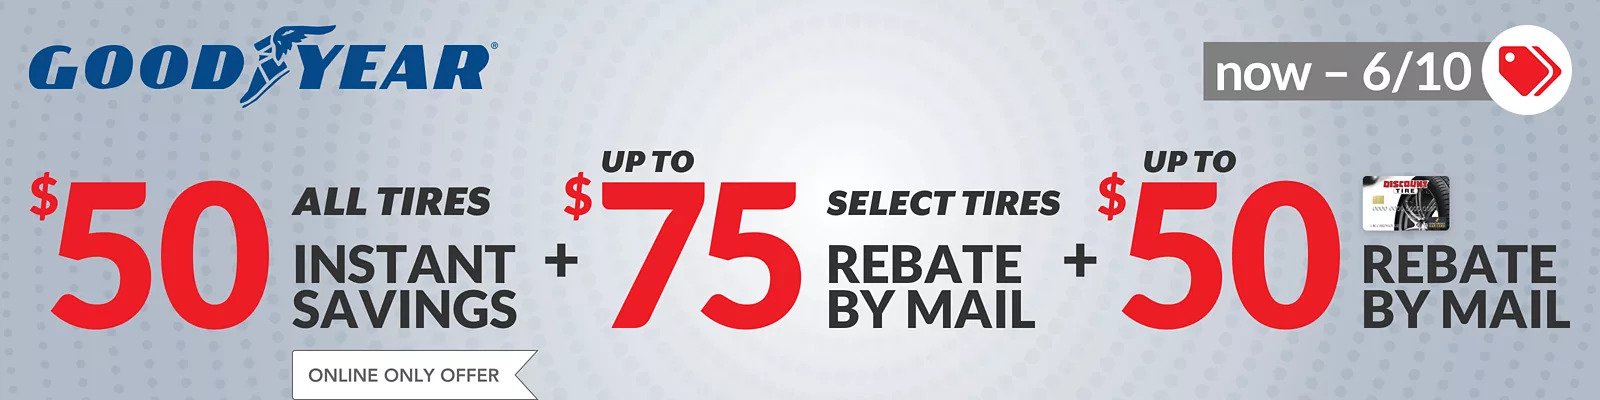 Goodyear rebate for June 2021 with Discount Tire Direct